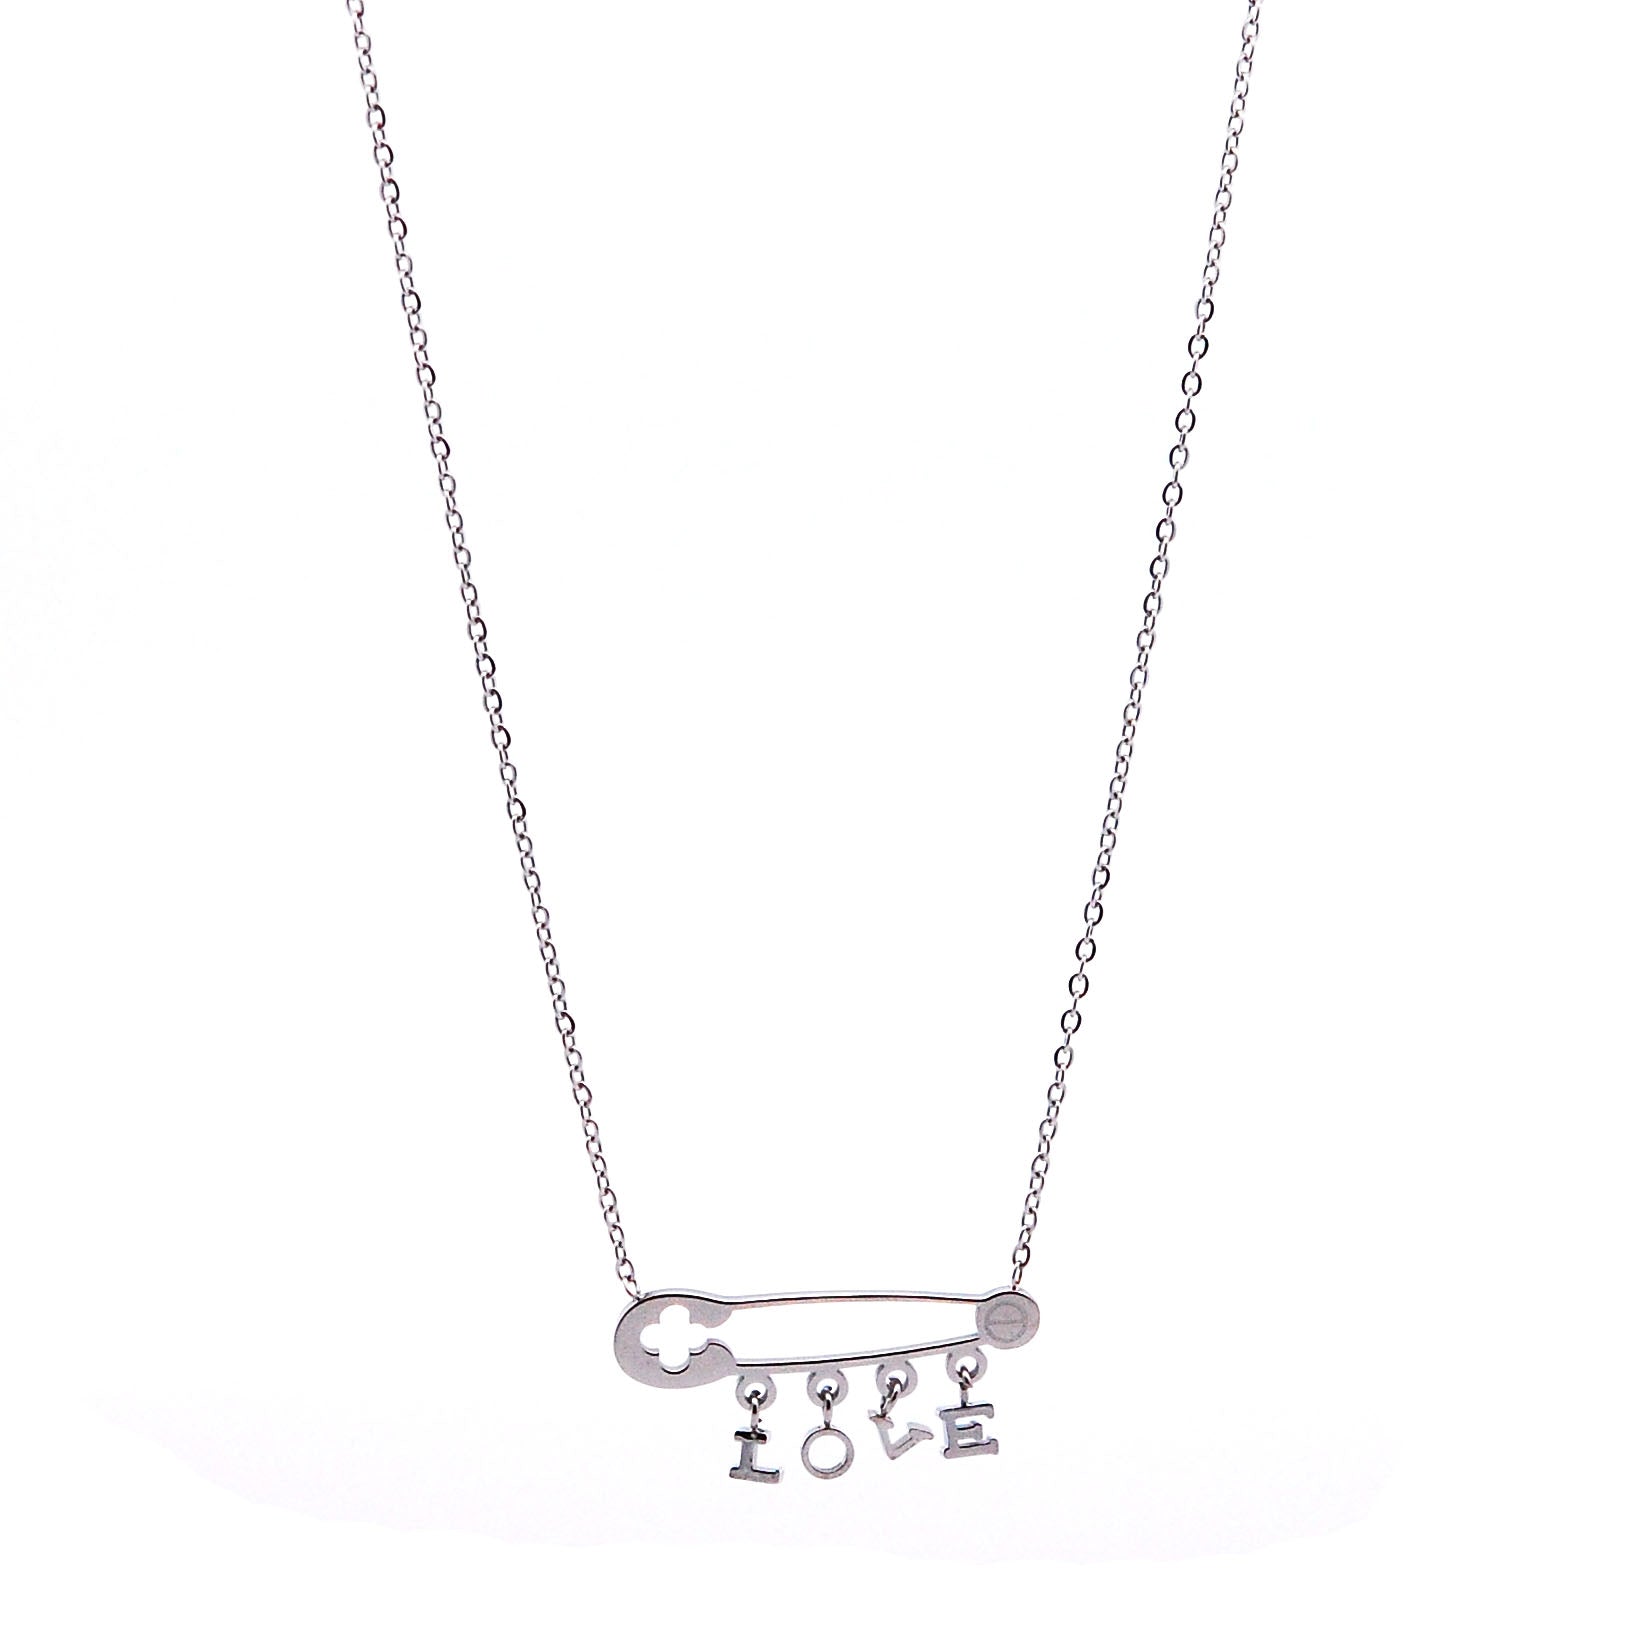 ESN 7660: "Pin Me In Love" Safety Necklace